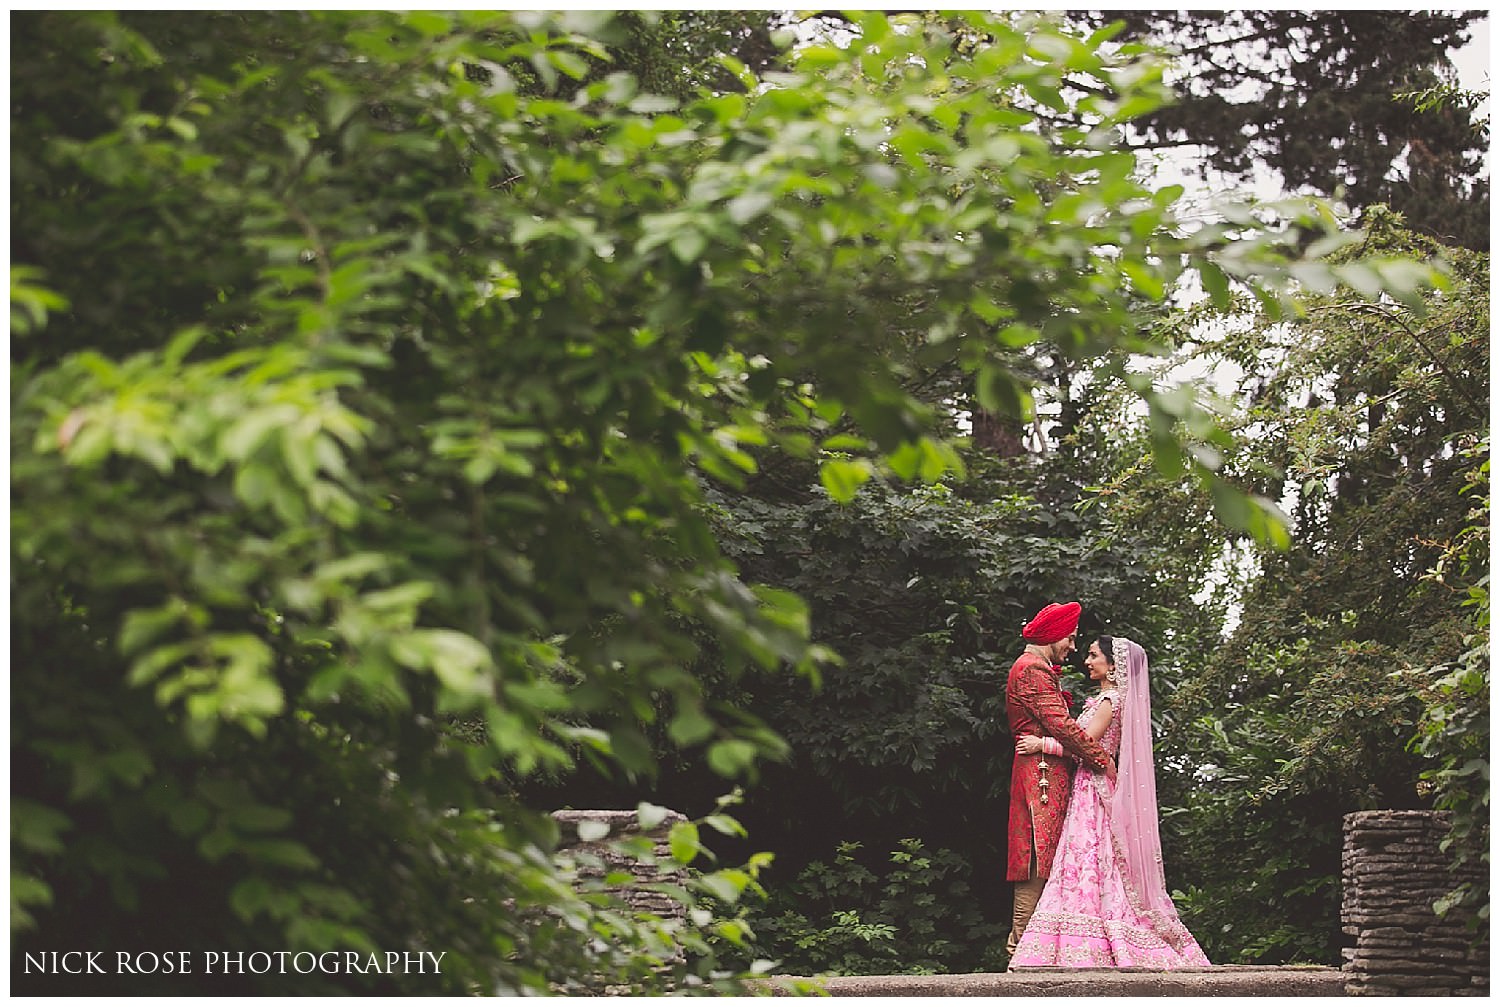 Sikh Wedding Photography in London